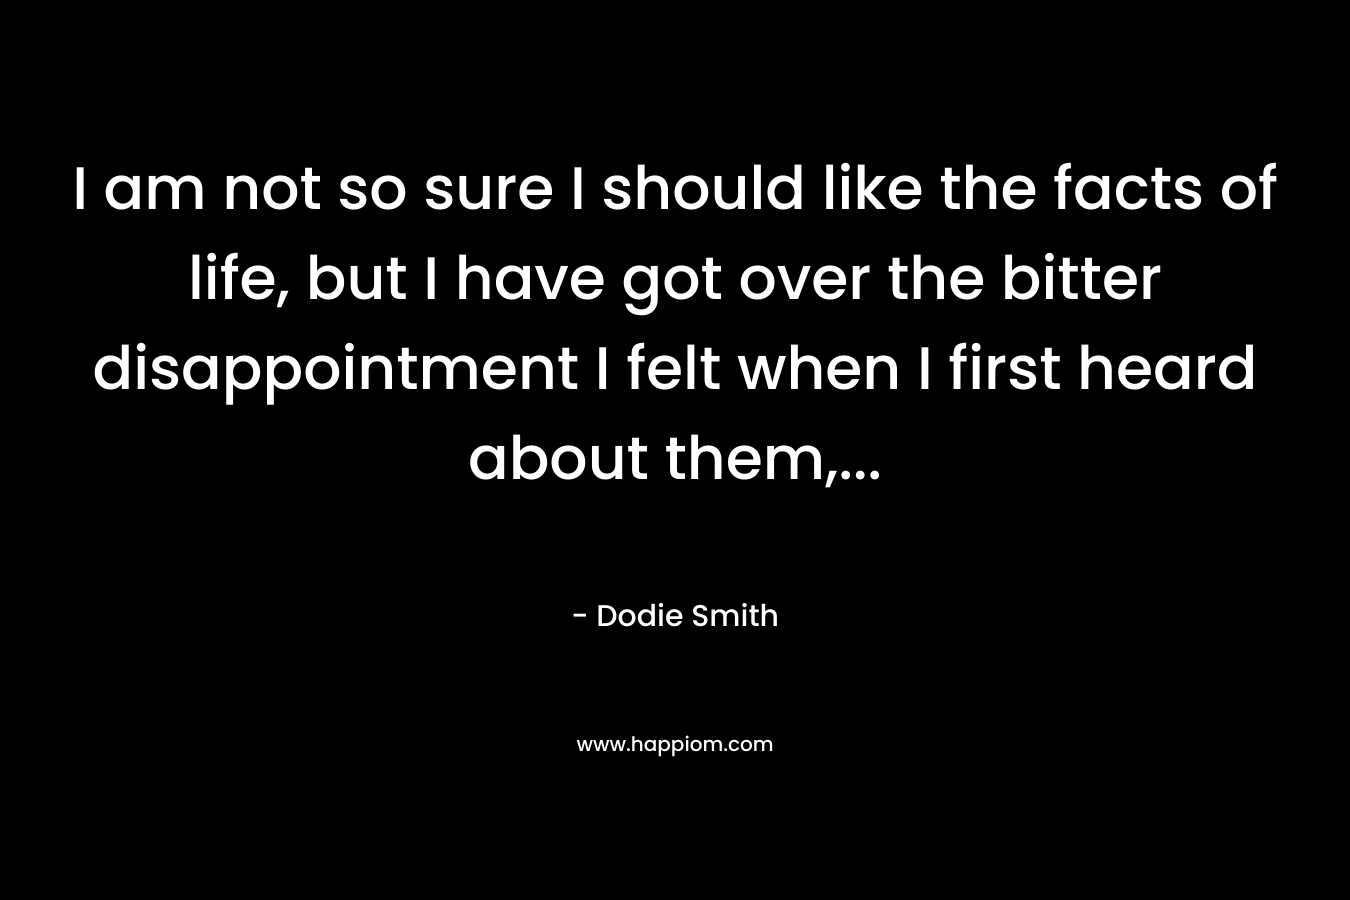 I am not so sure I should like the facts of life, but I have got over the bitter disappointment I felt when I first heard about them,… – Dodie Smith